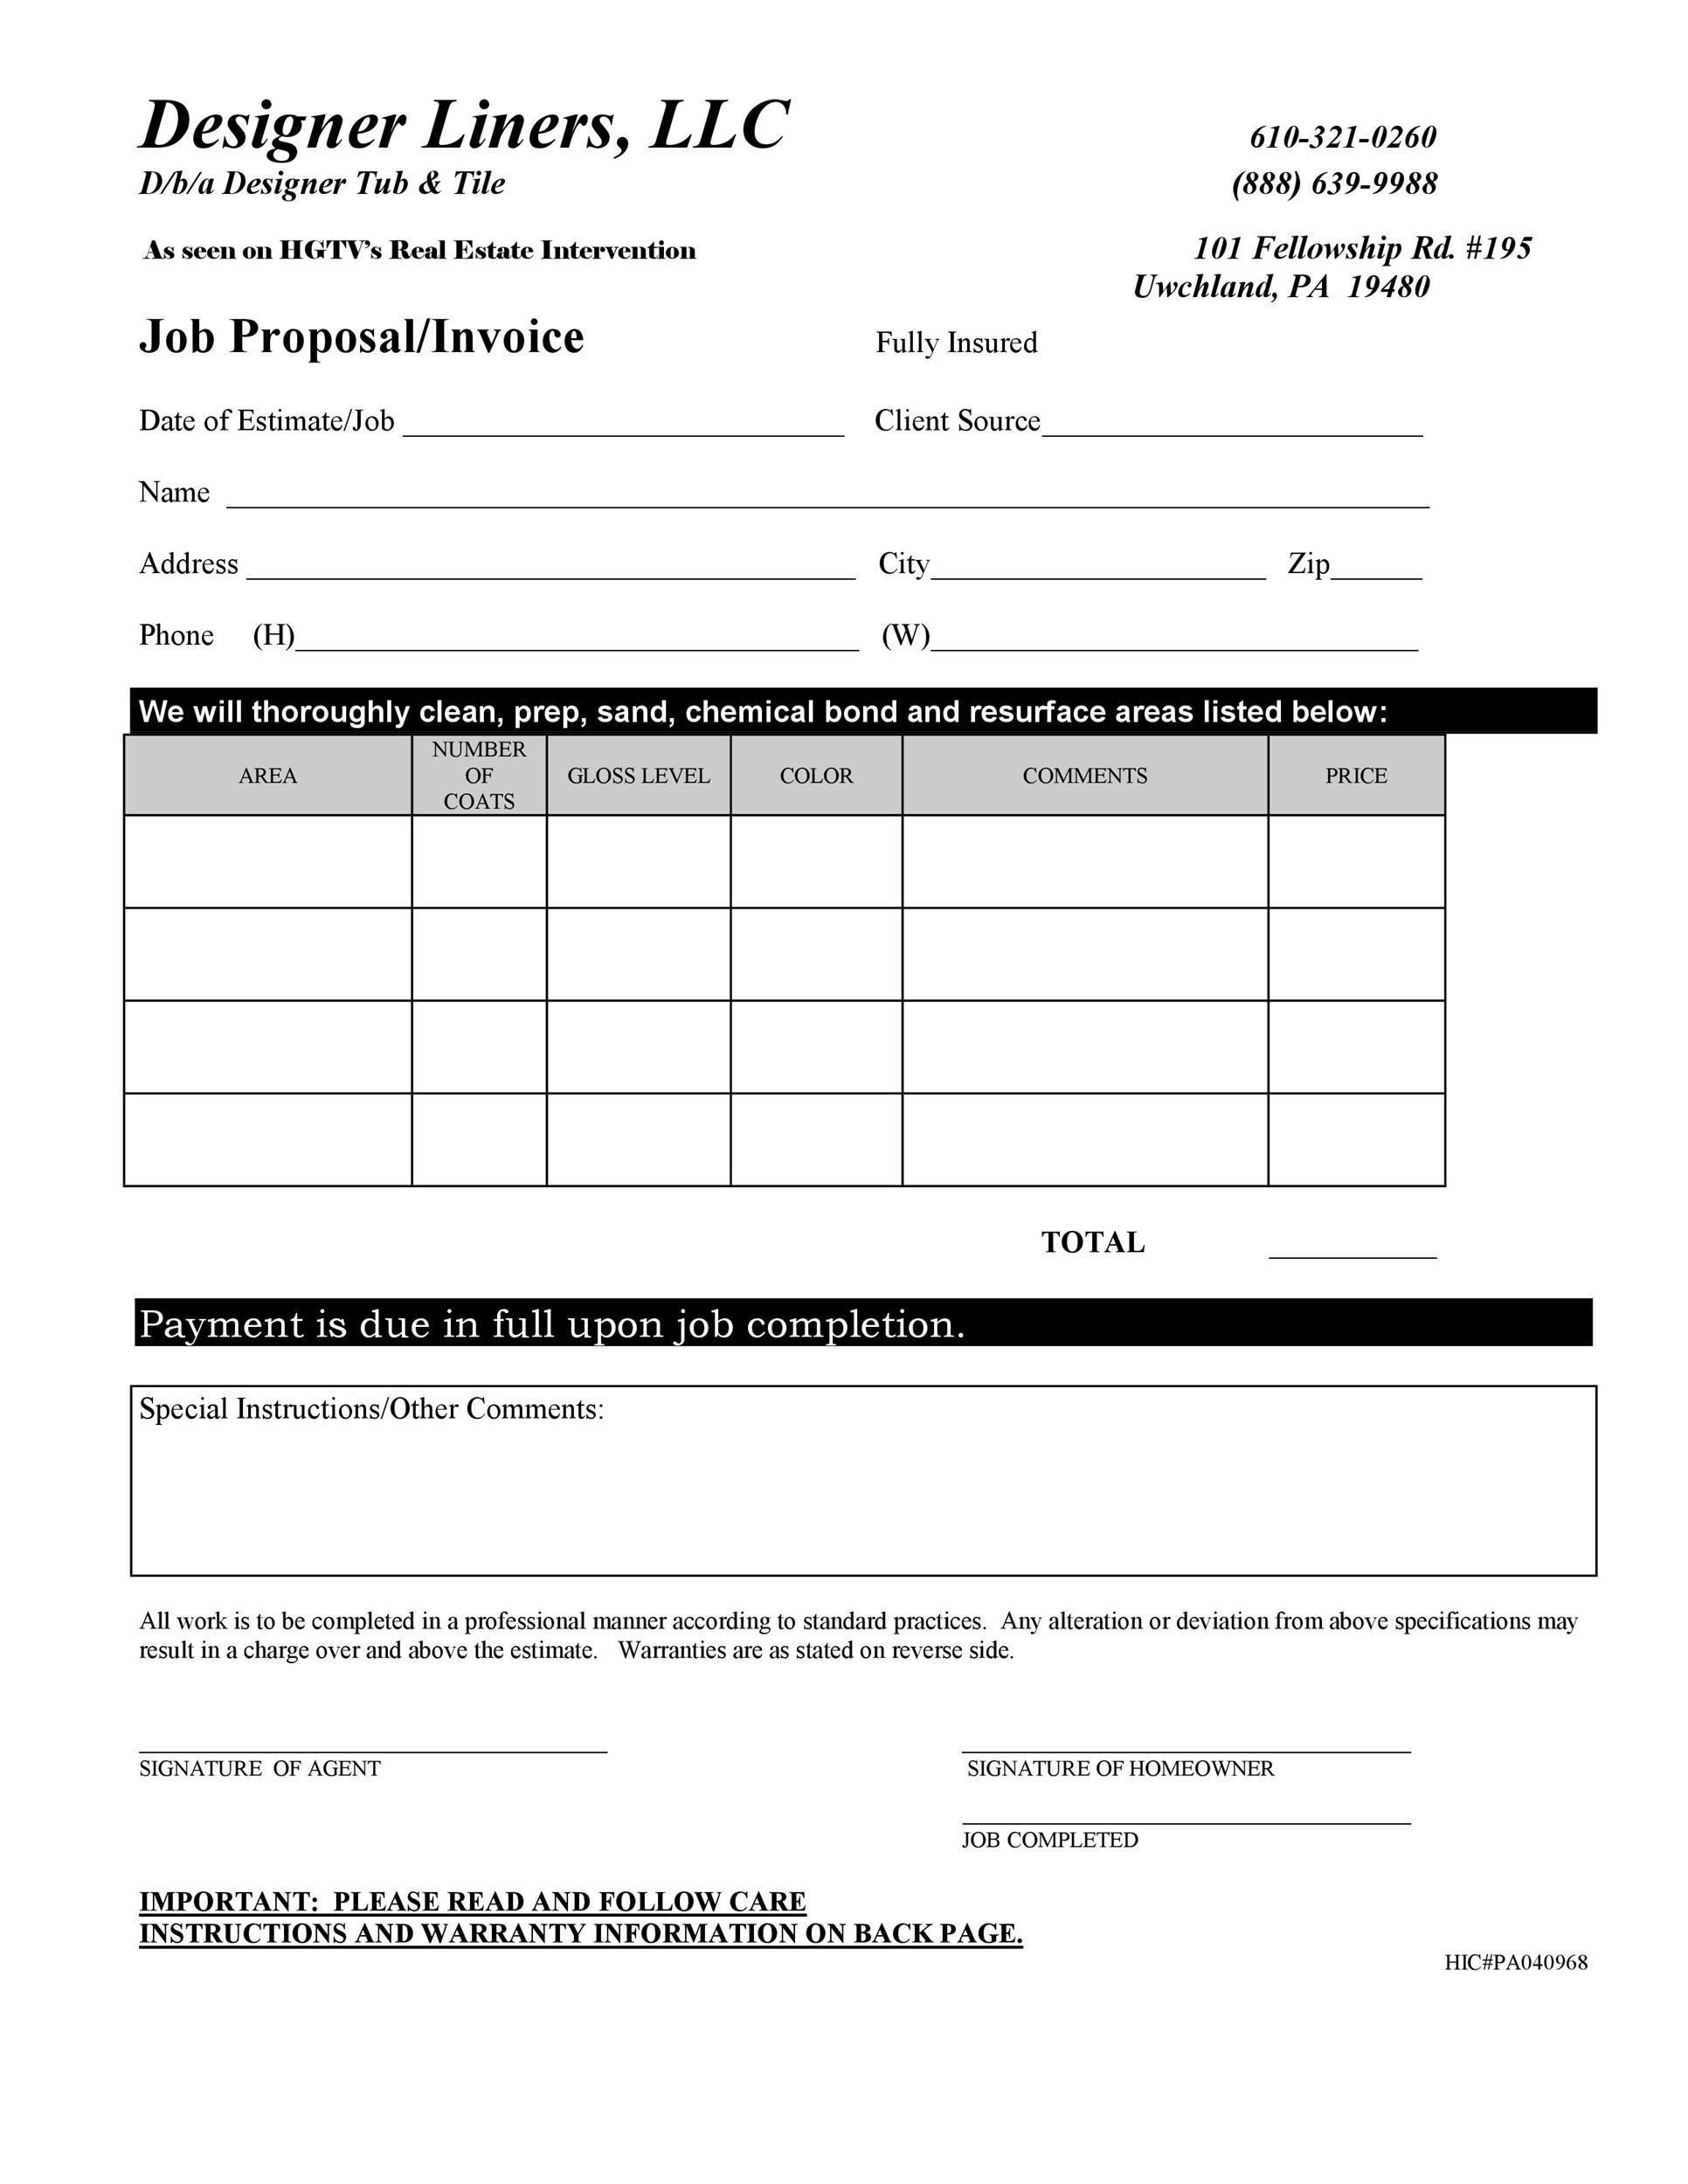 Template For A Job Proposal